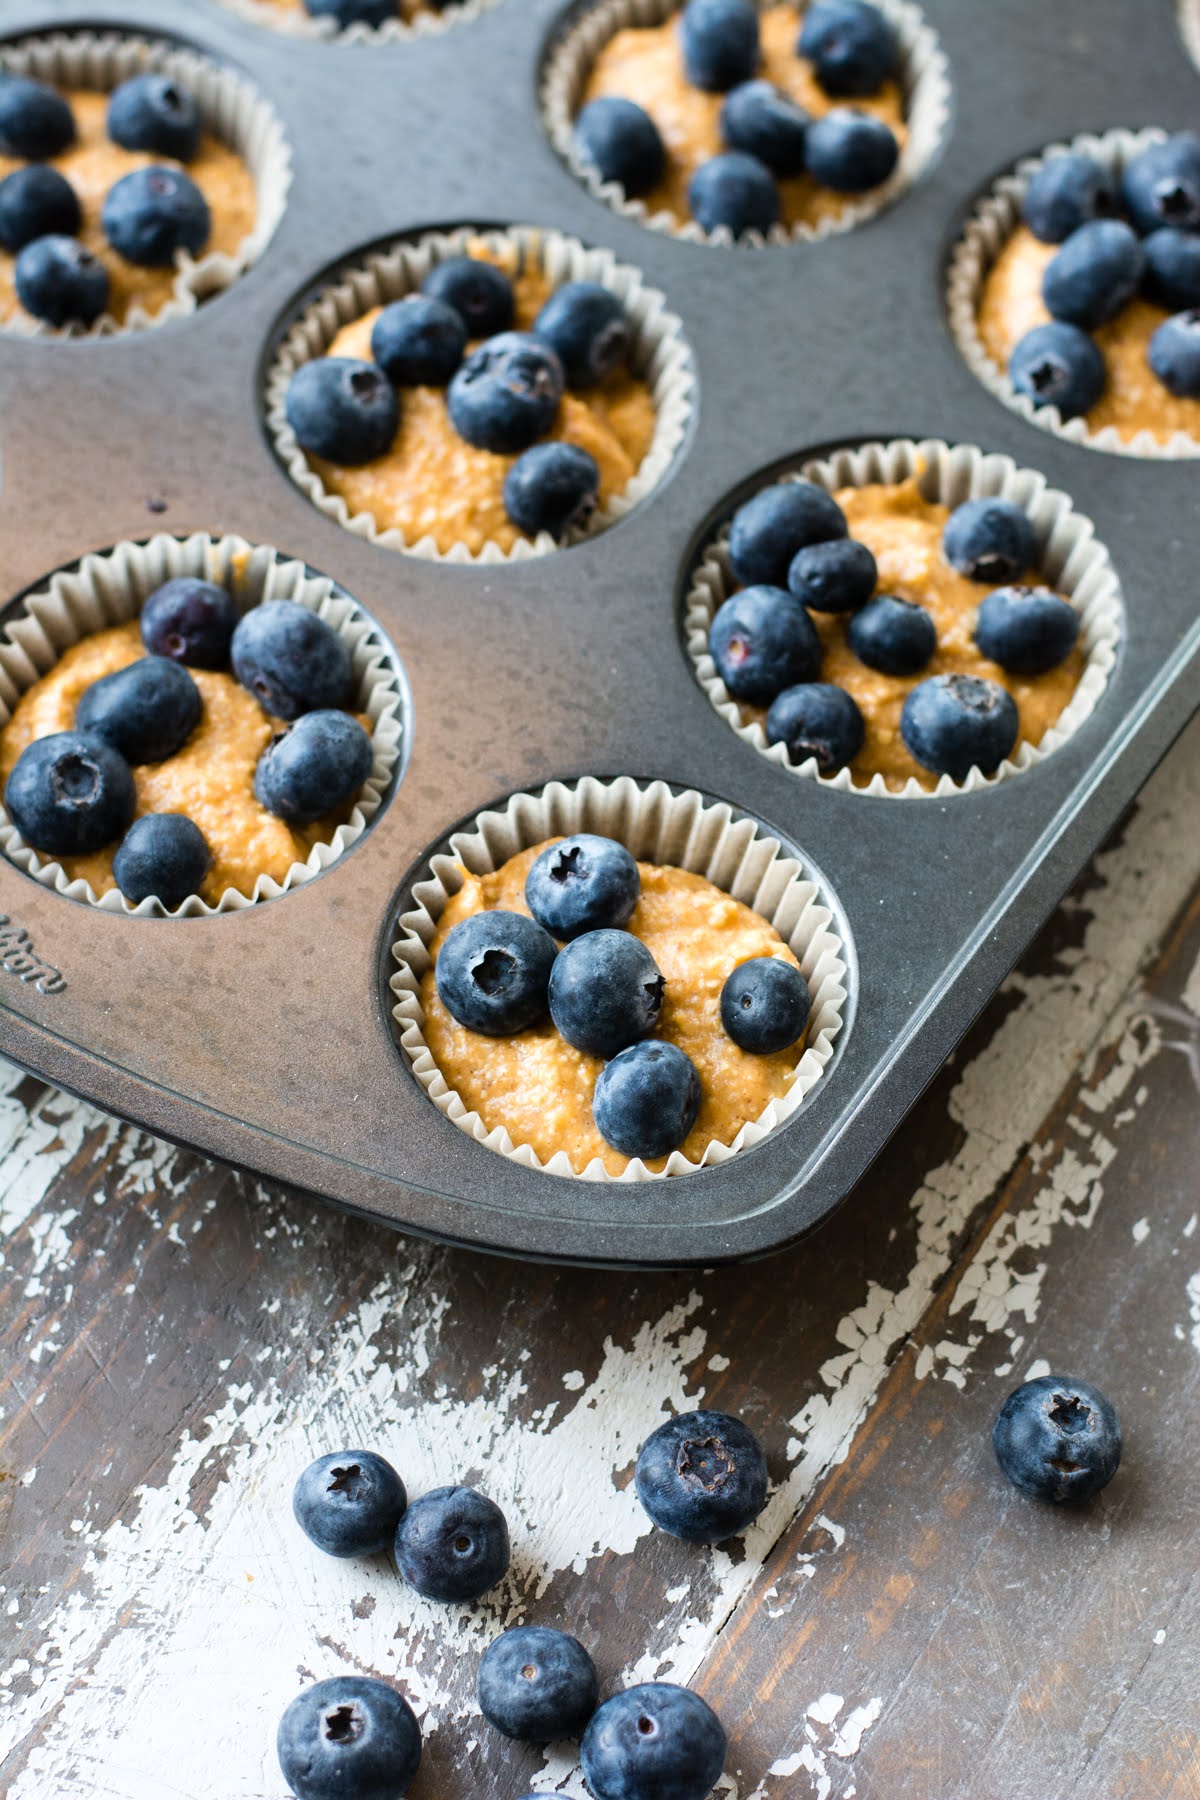 Blueberries on top of the muffin batter